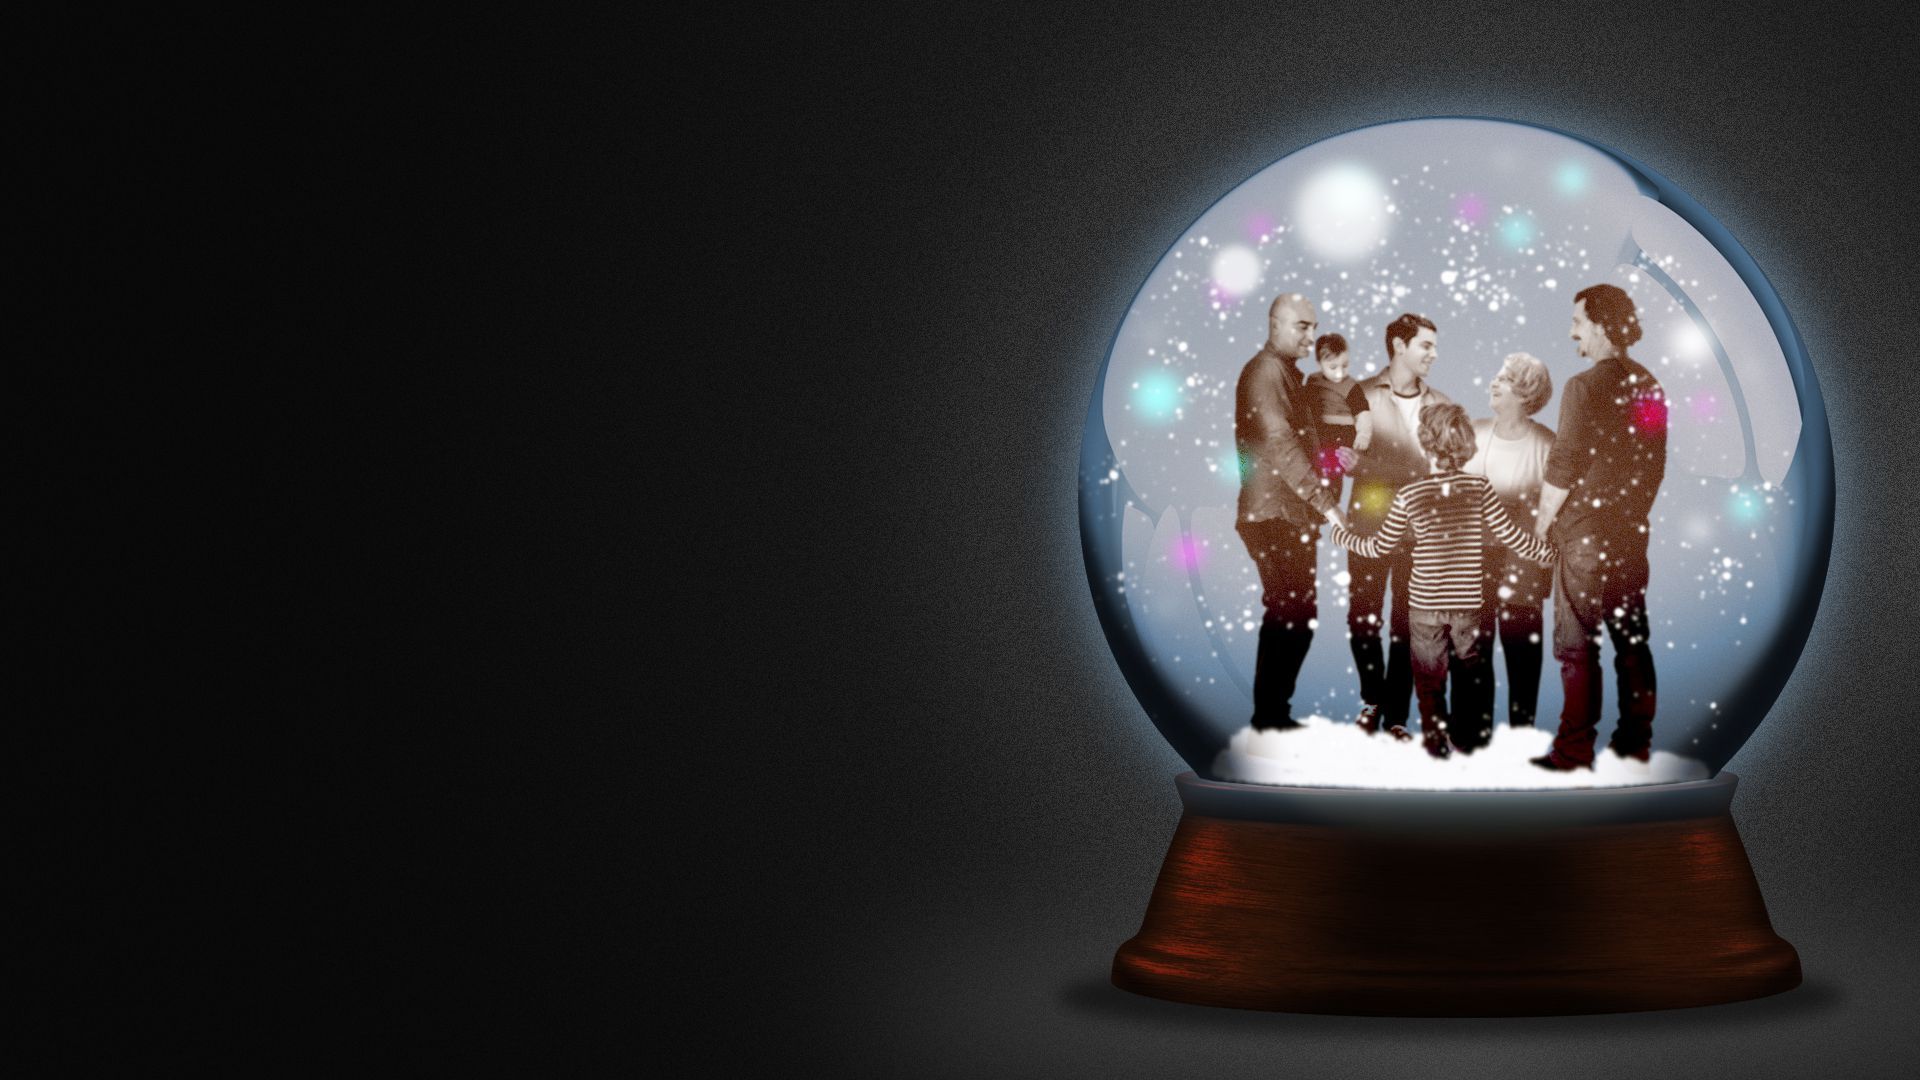 Illustration of a snow globe with a family inside